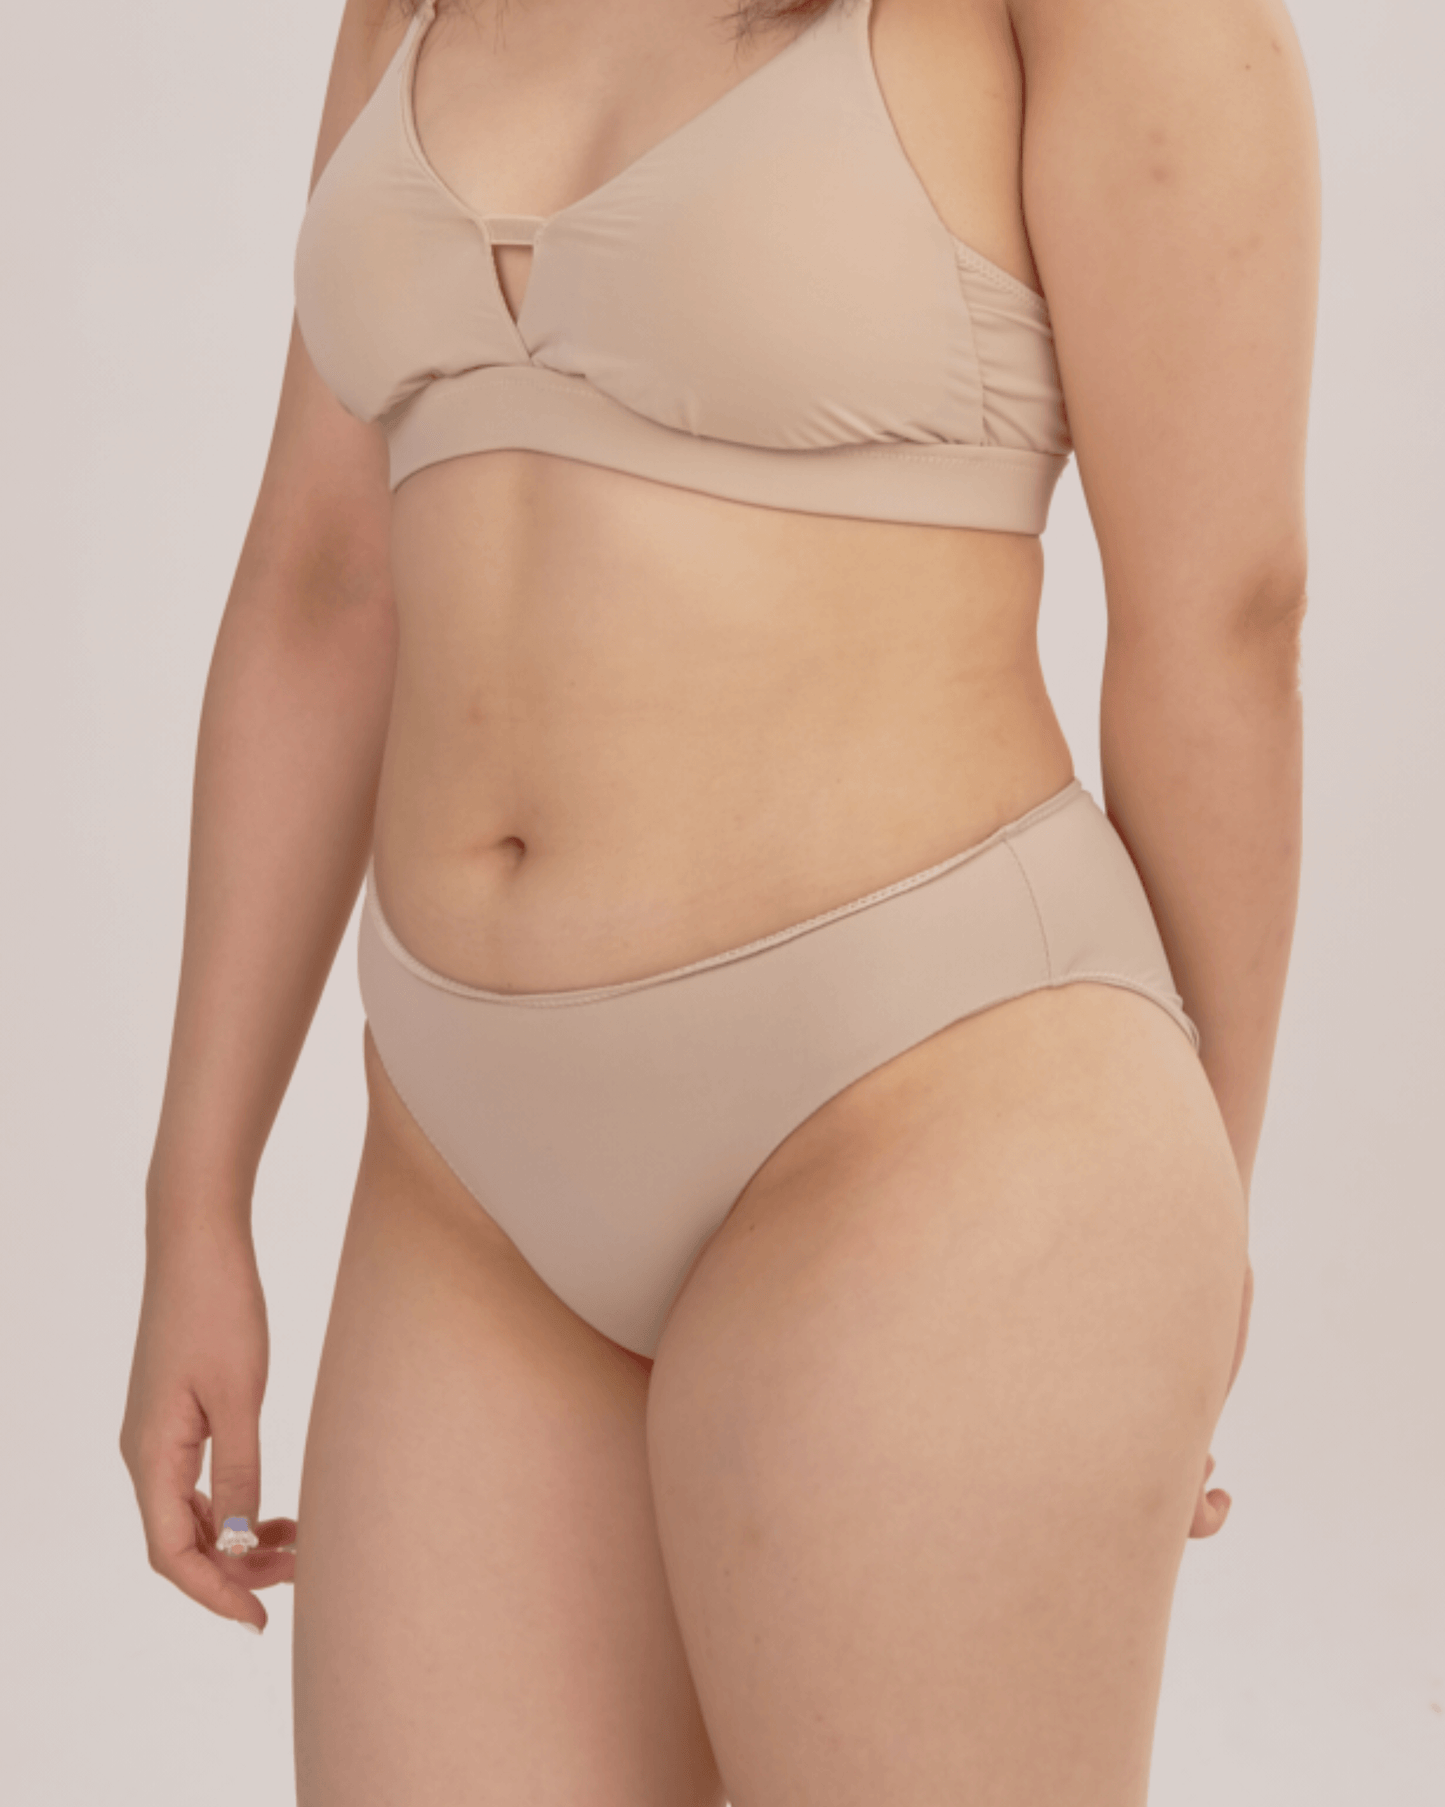 elevated basics panty in #28